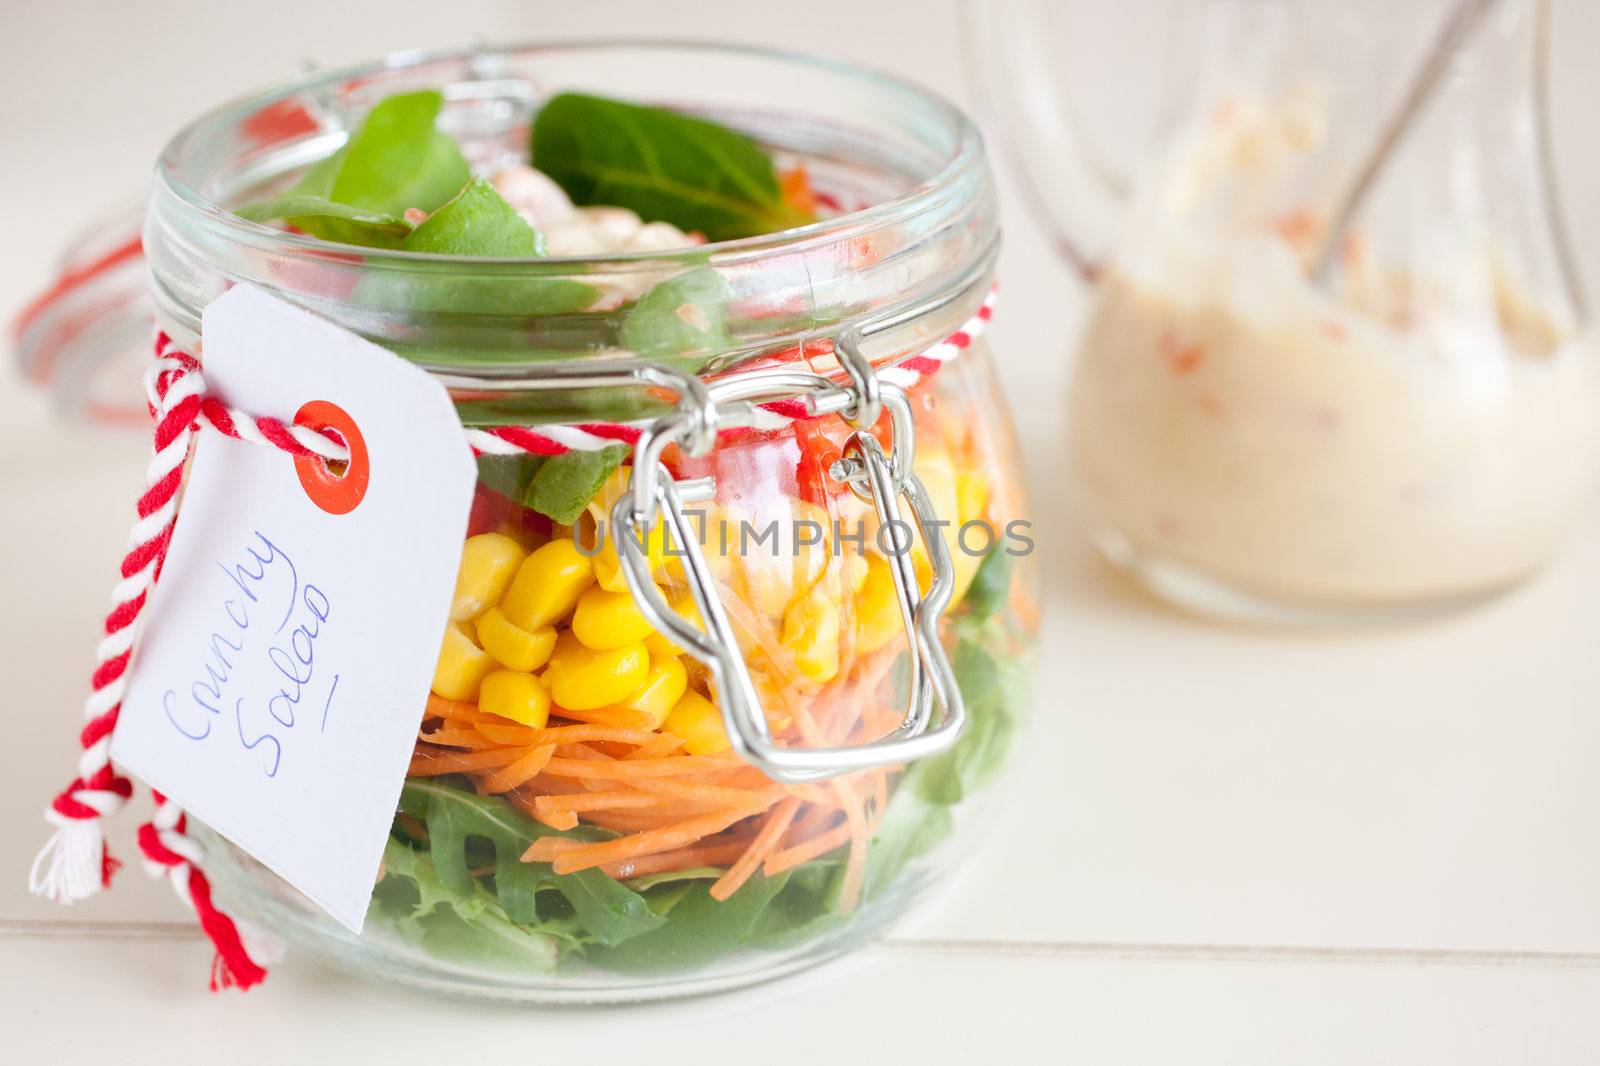 Easy take away for a picnic salad by Fotosmurf